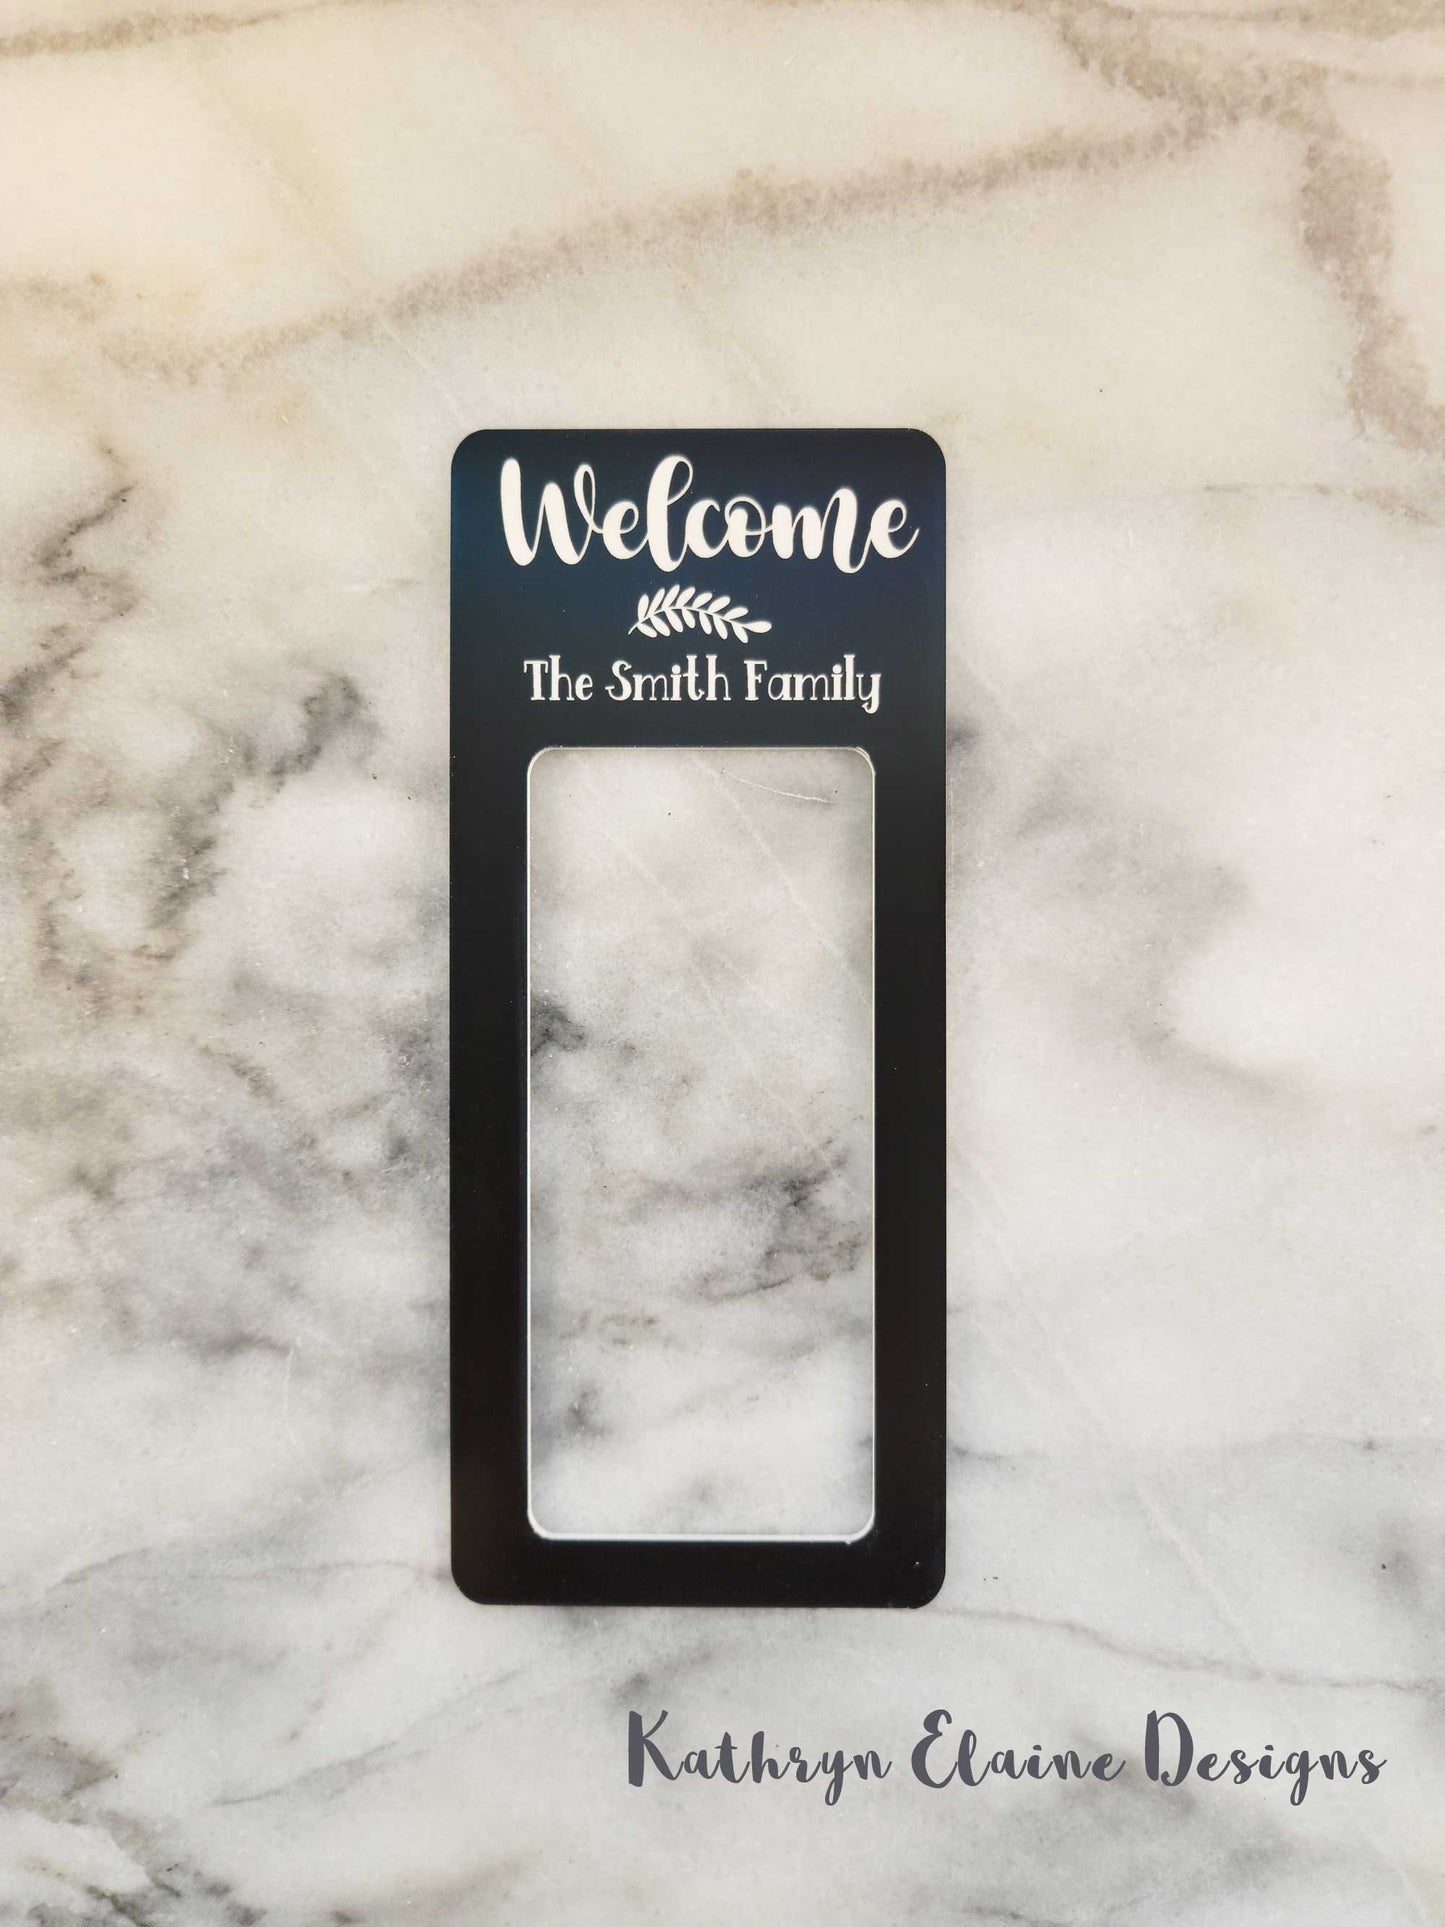 Black laminate doorbell surround stating Welcome (leaf design) the Smith Family in white writing on marble background.